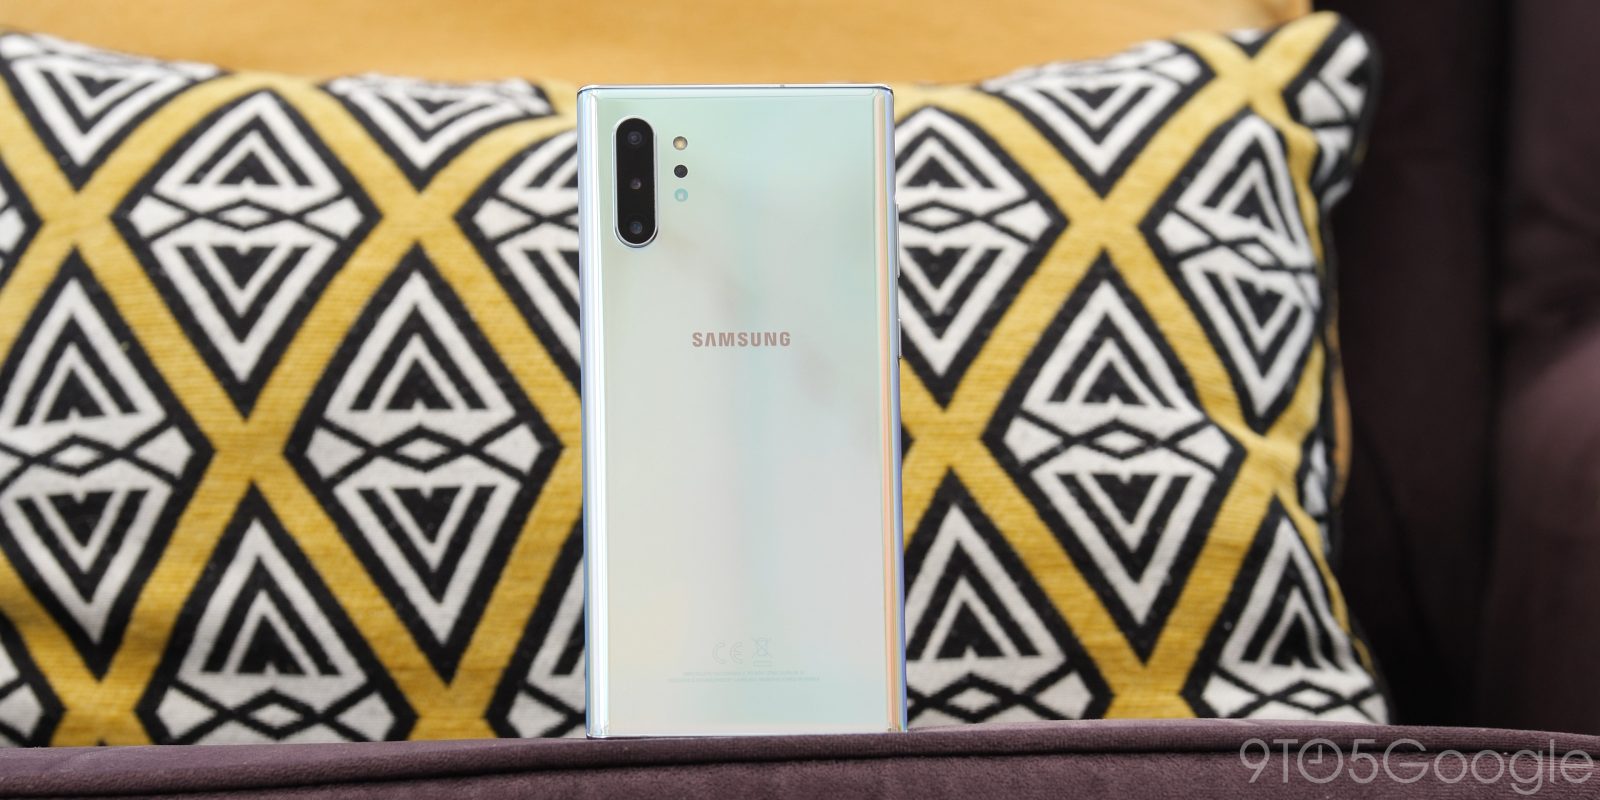 I used the Samsung Galaxy Note 10 Plus for a month. Here's what I found 